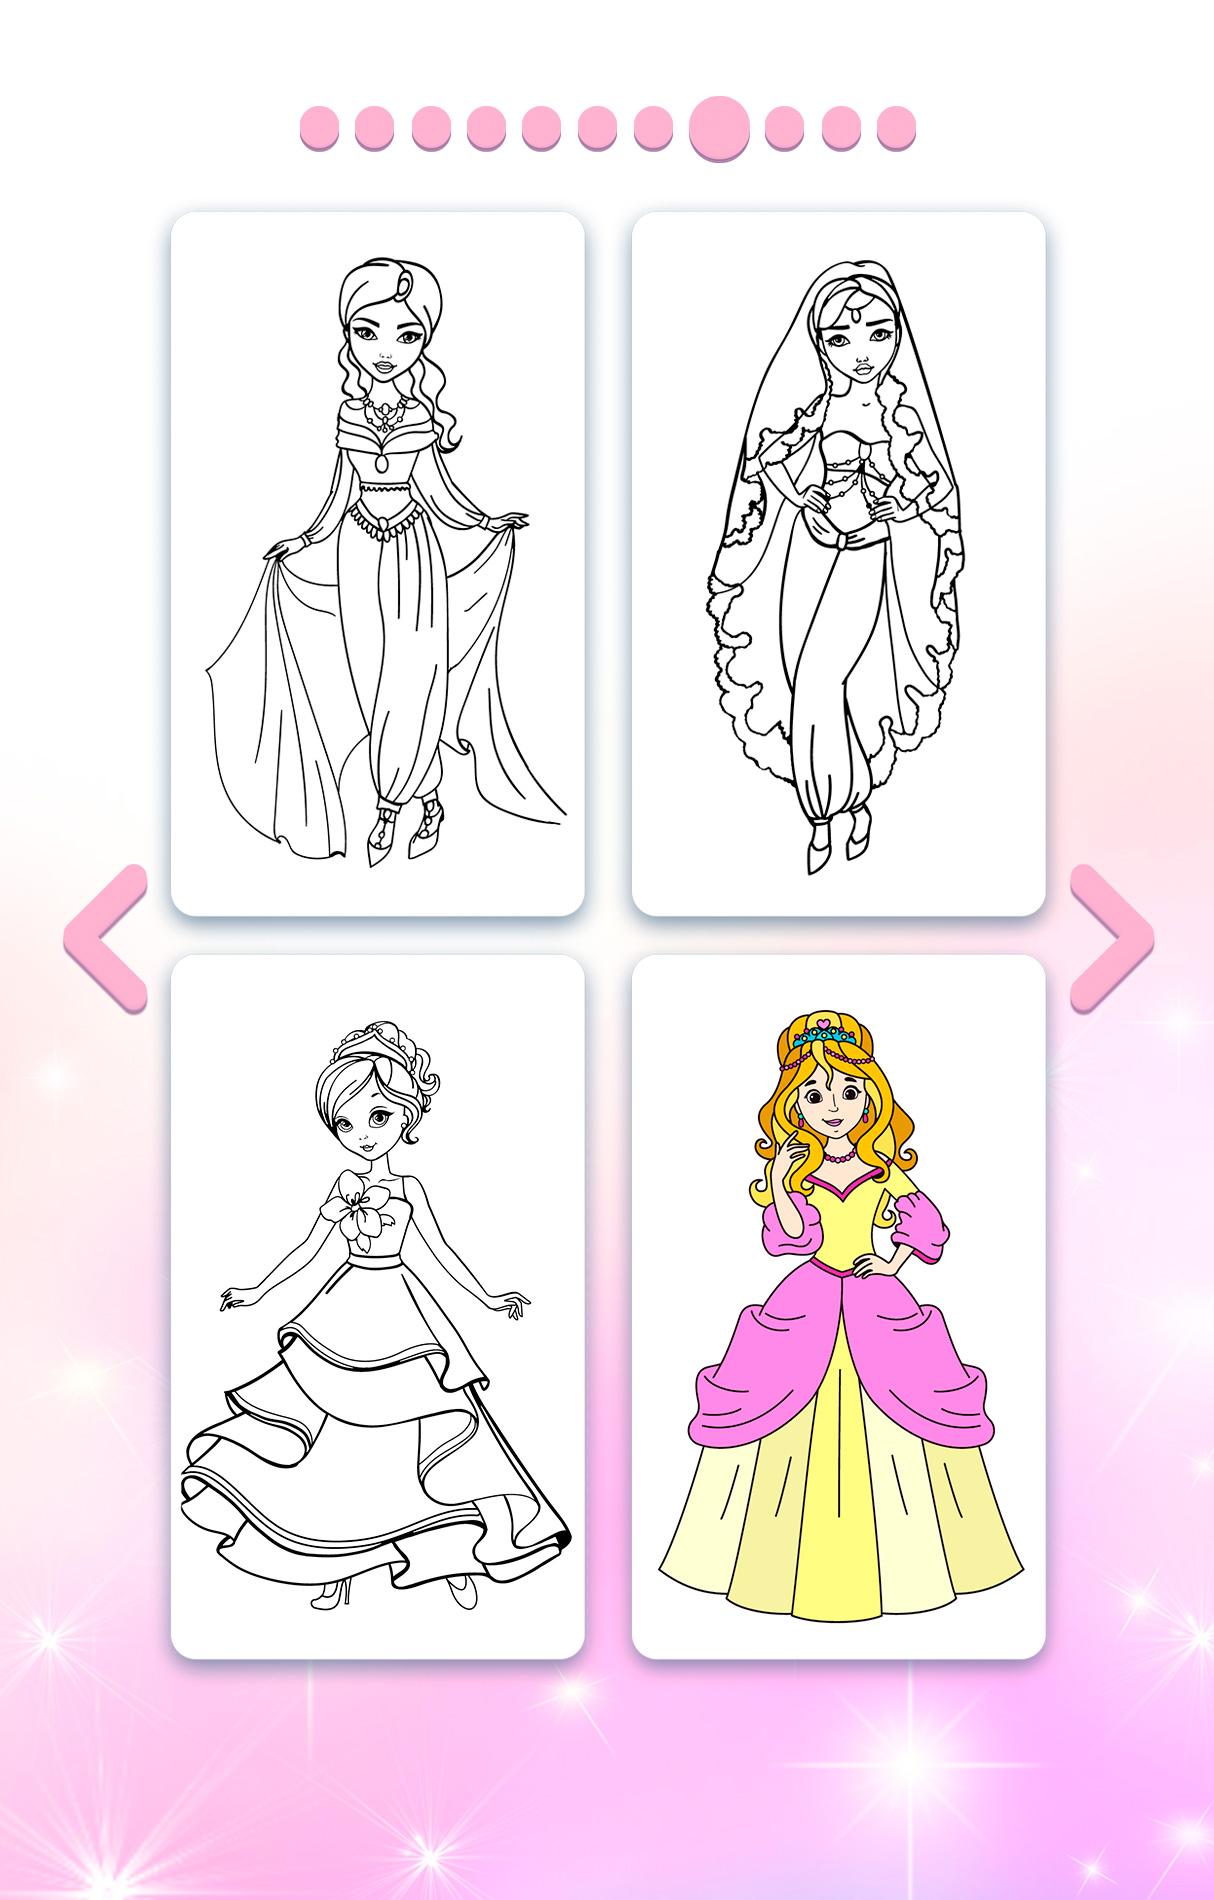 Princess Color by Number – Princess Coloring Book APK 220.220.220.20 for ...